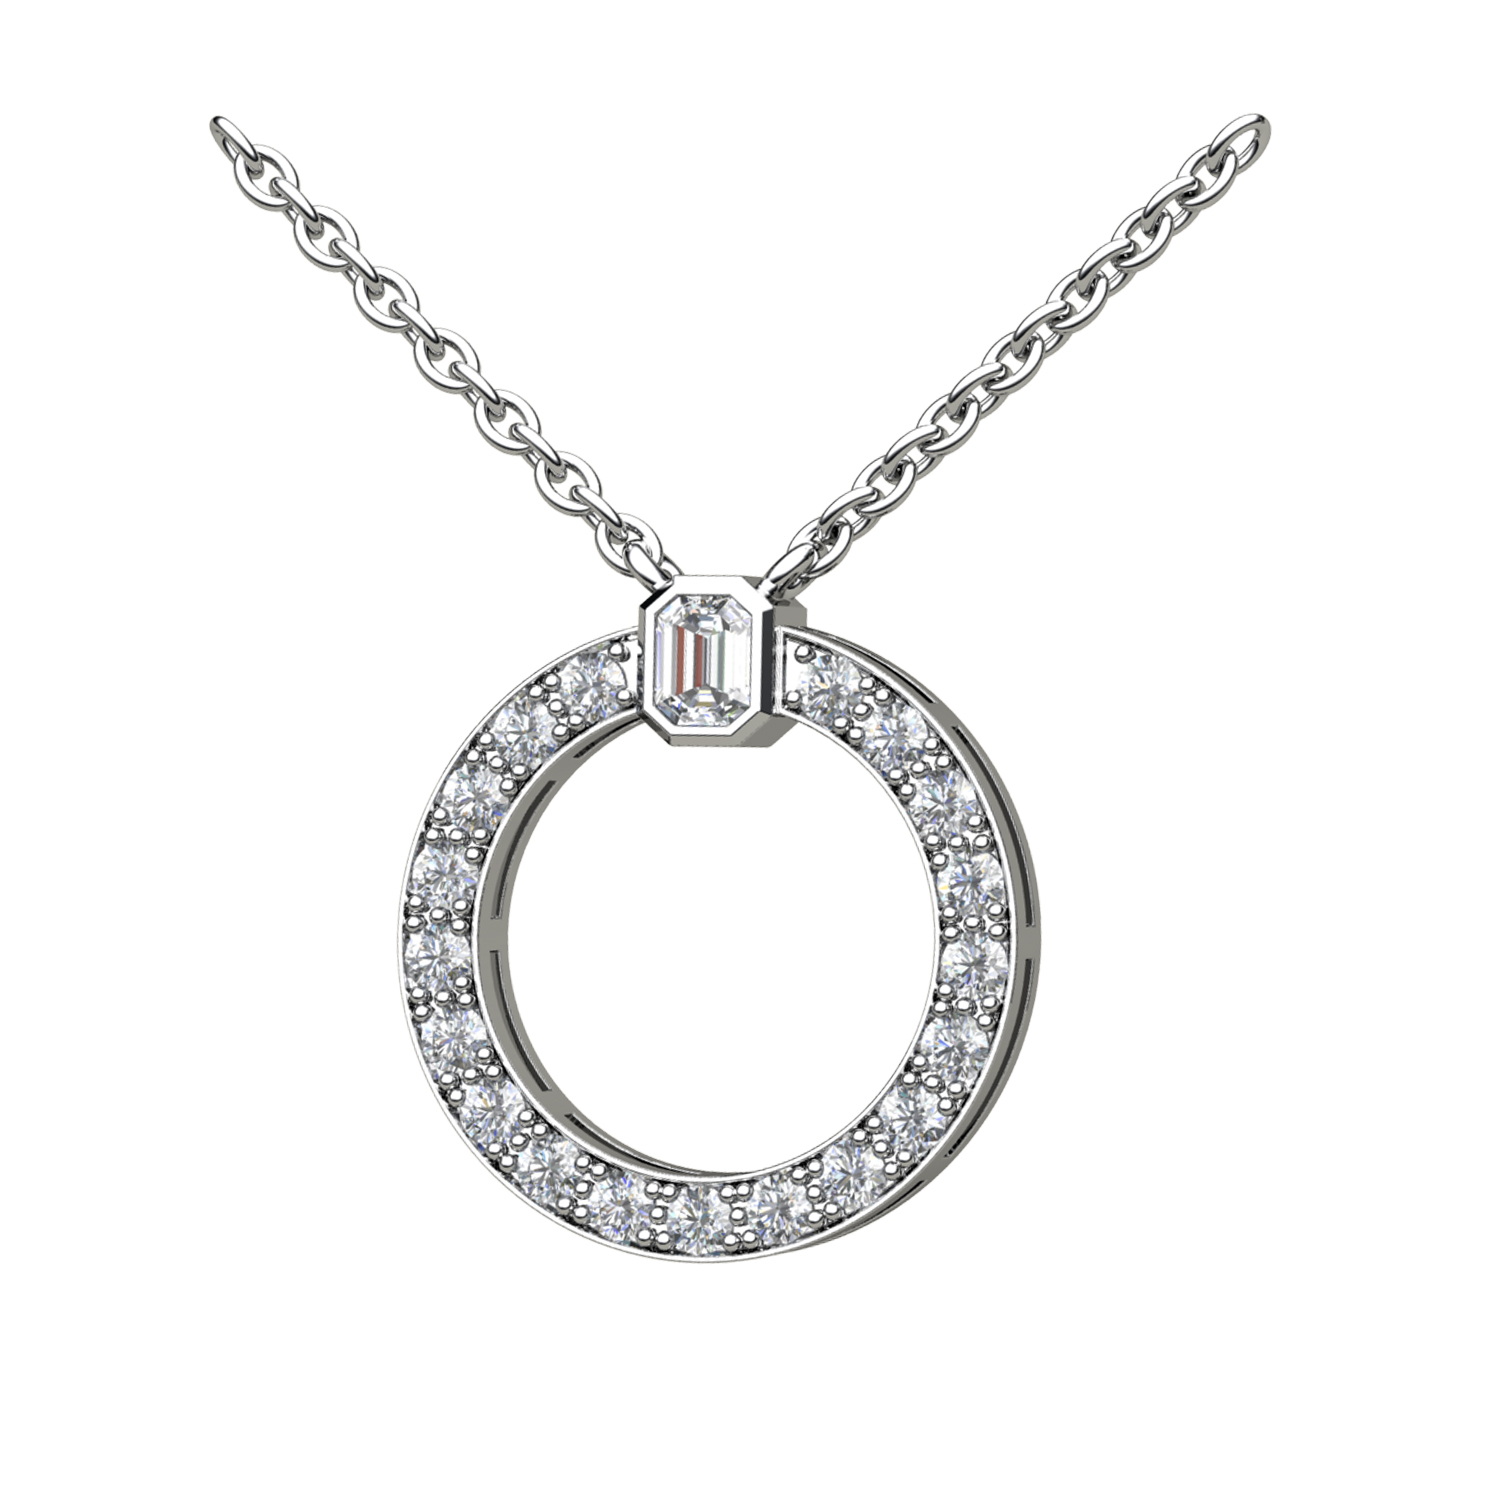 Round Halo Of Diamonds With An Emerald Cut Diamond Topper In White